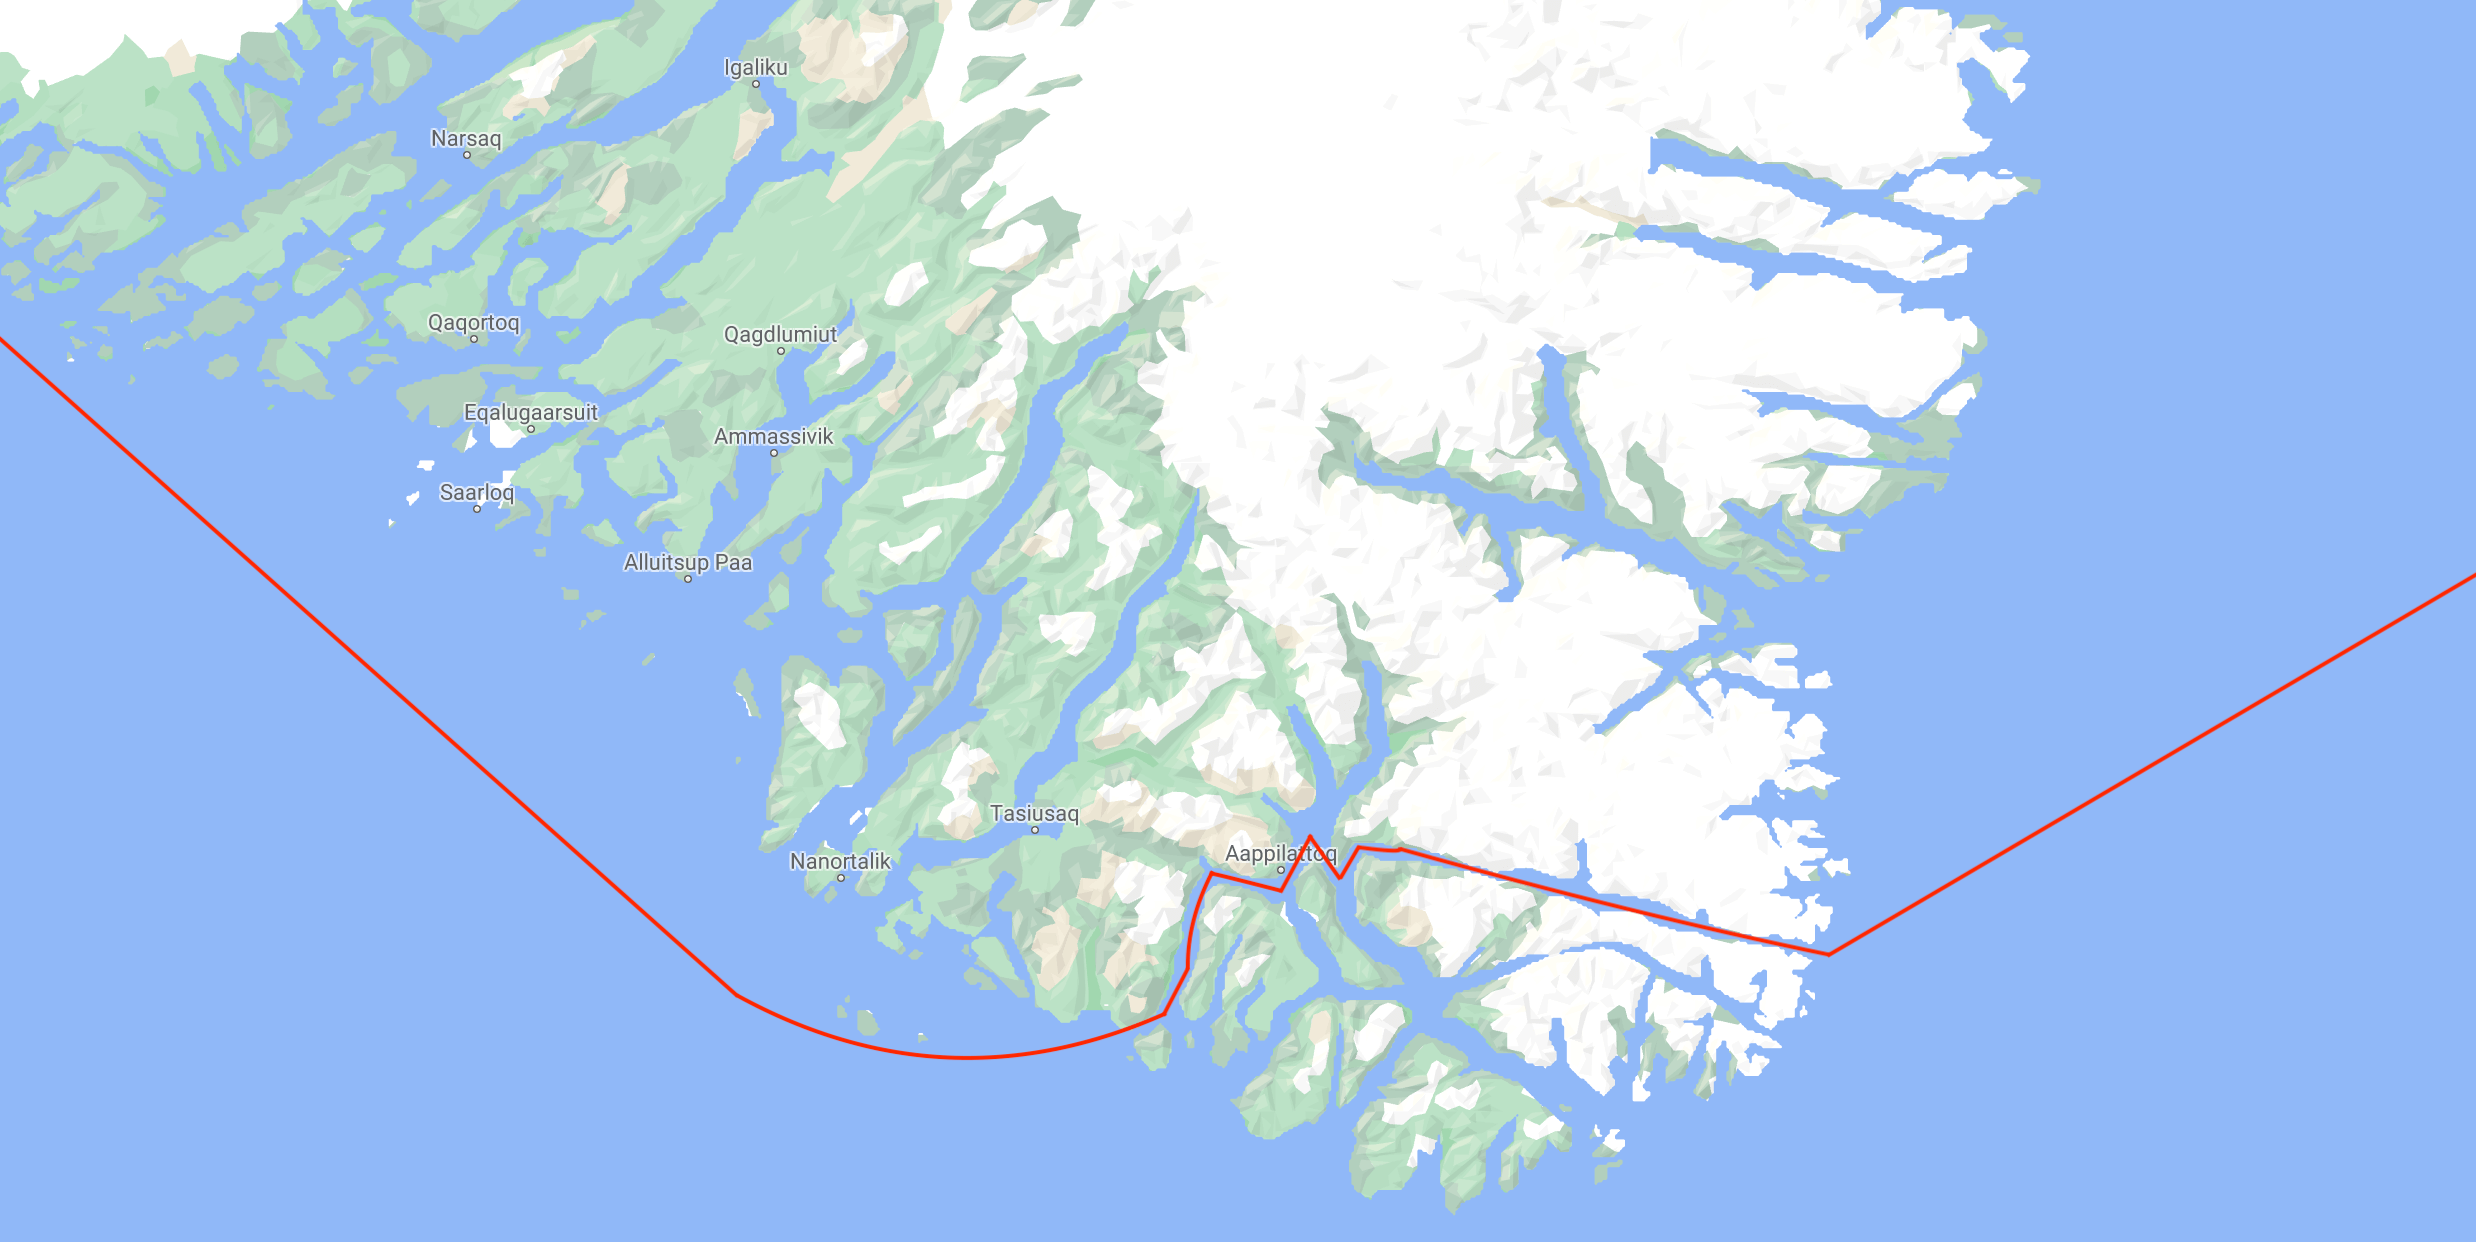 Planned passage through Prince Christian Sound, depending on sea ice levels.